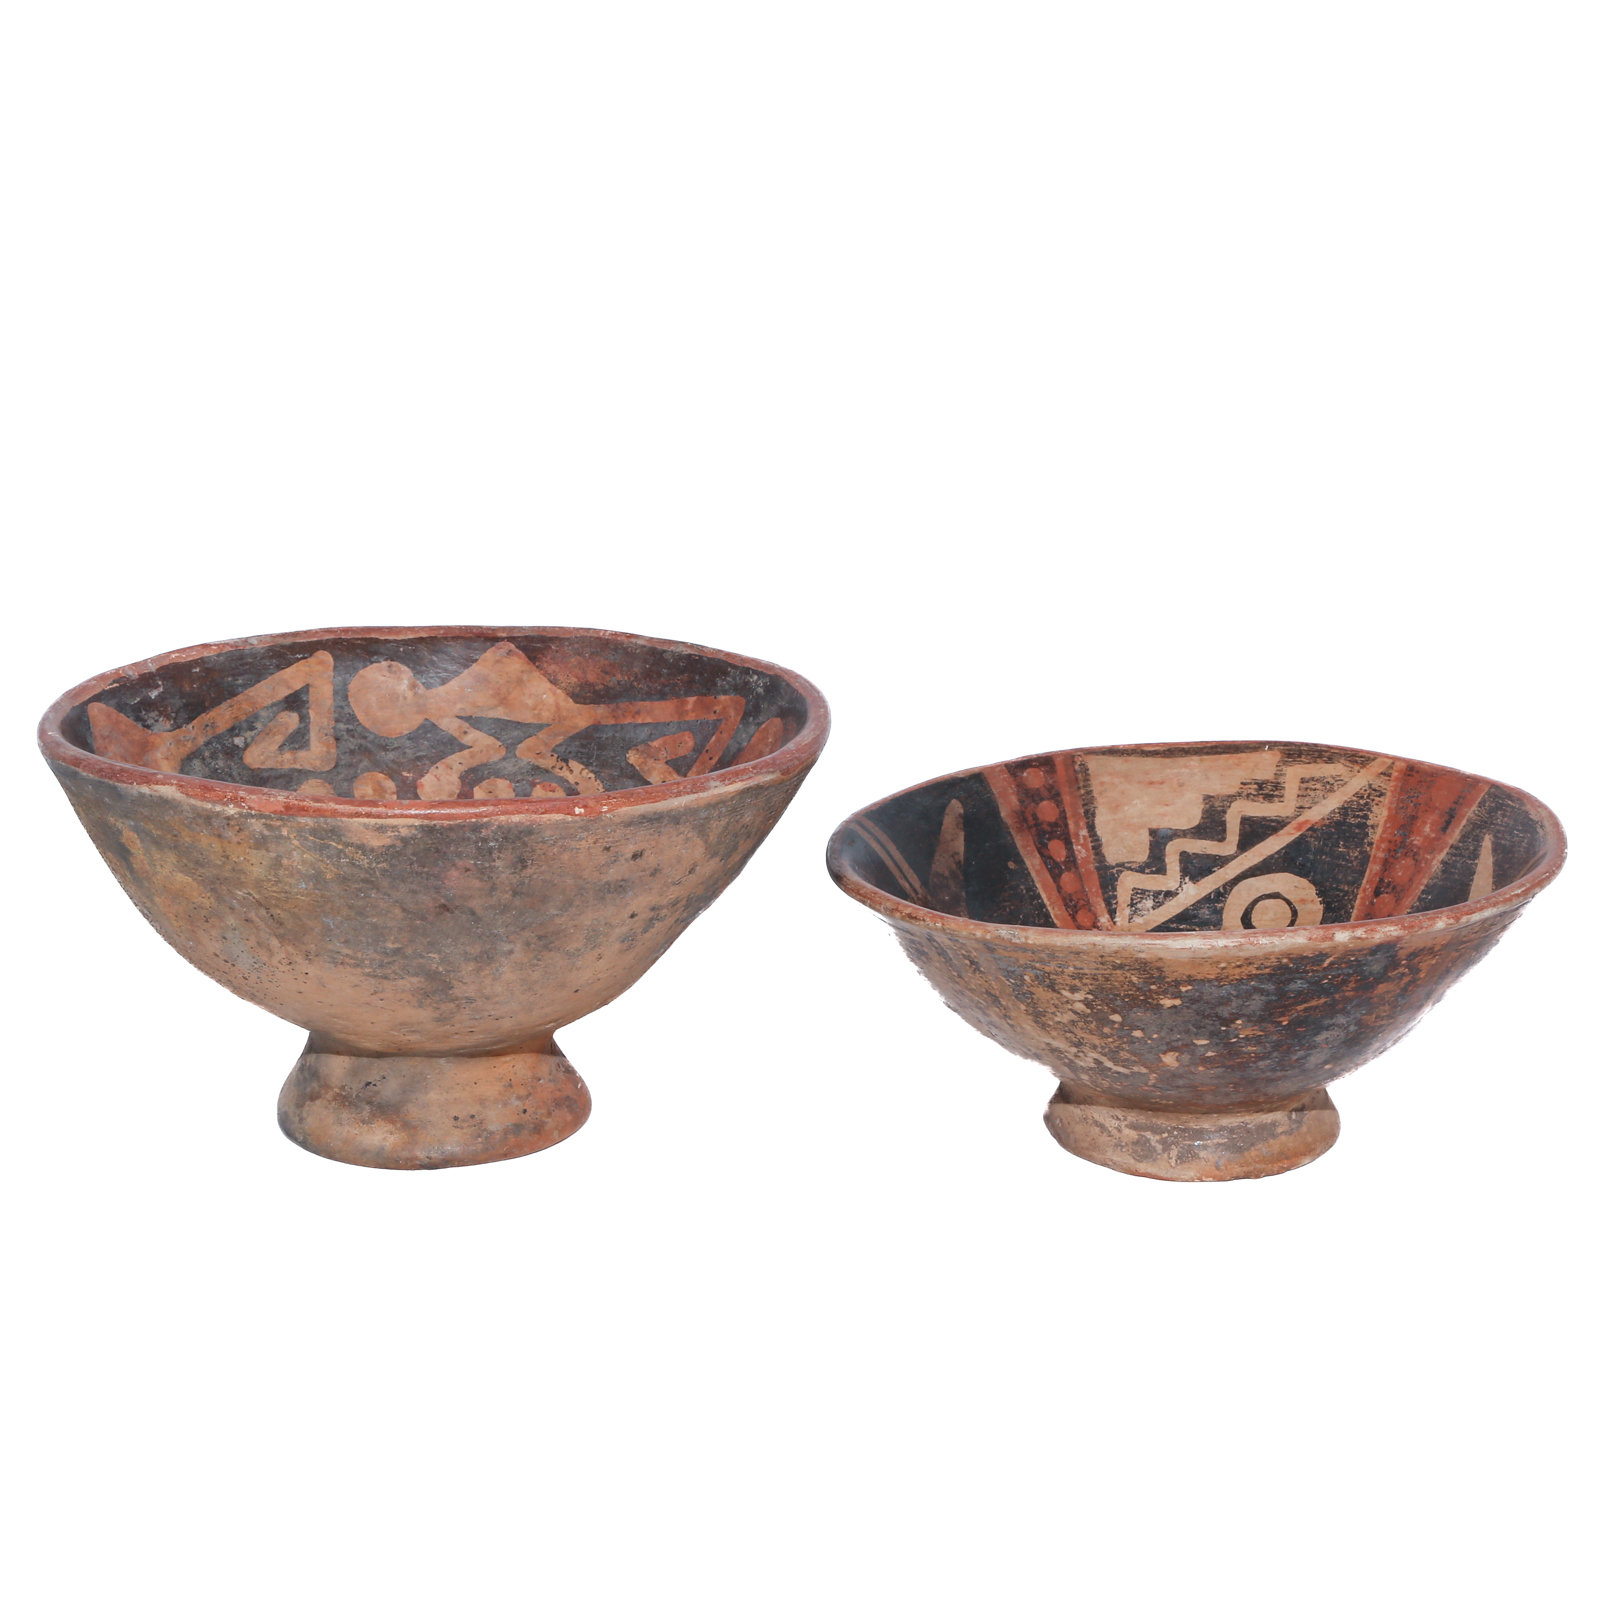 TWO NARINO RESIST-PAINTED EARTHENWARE